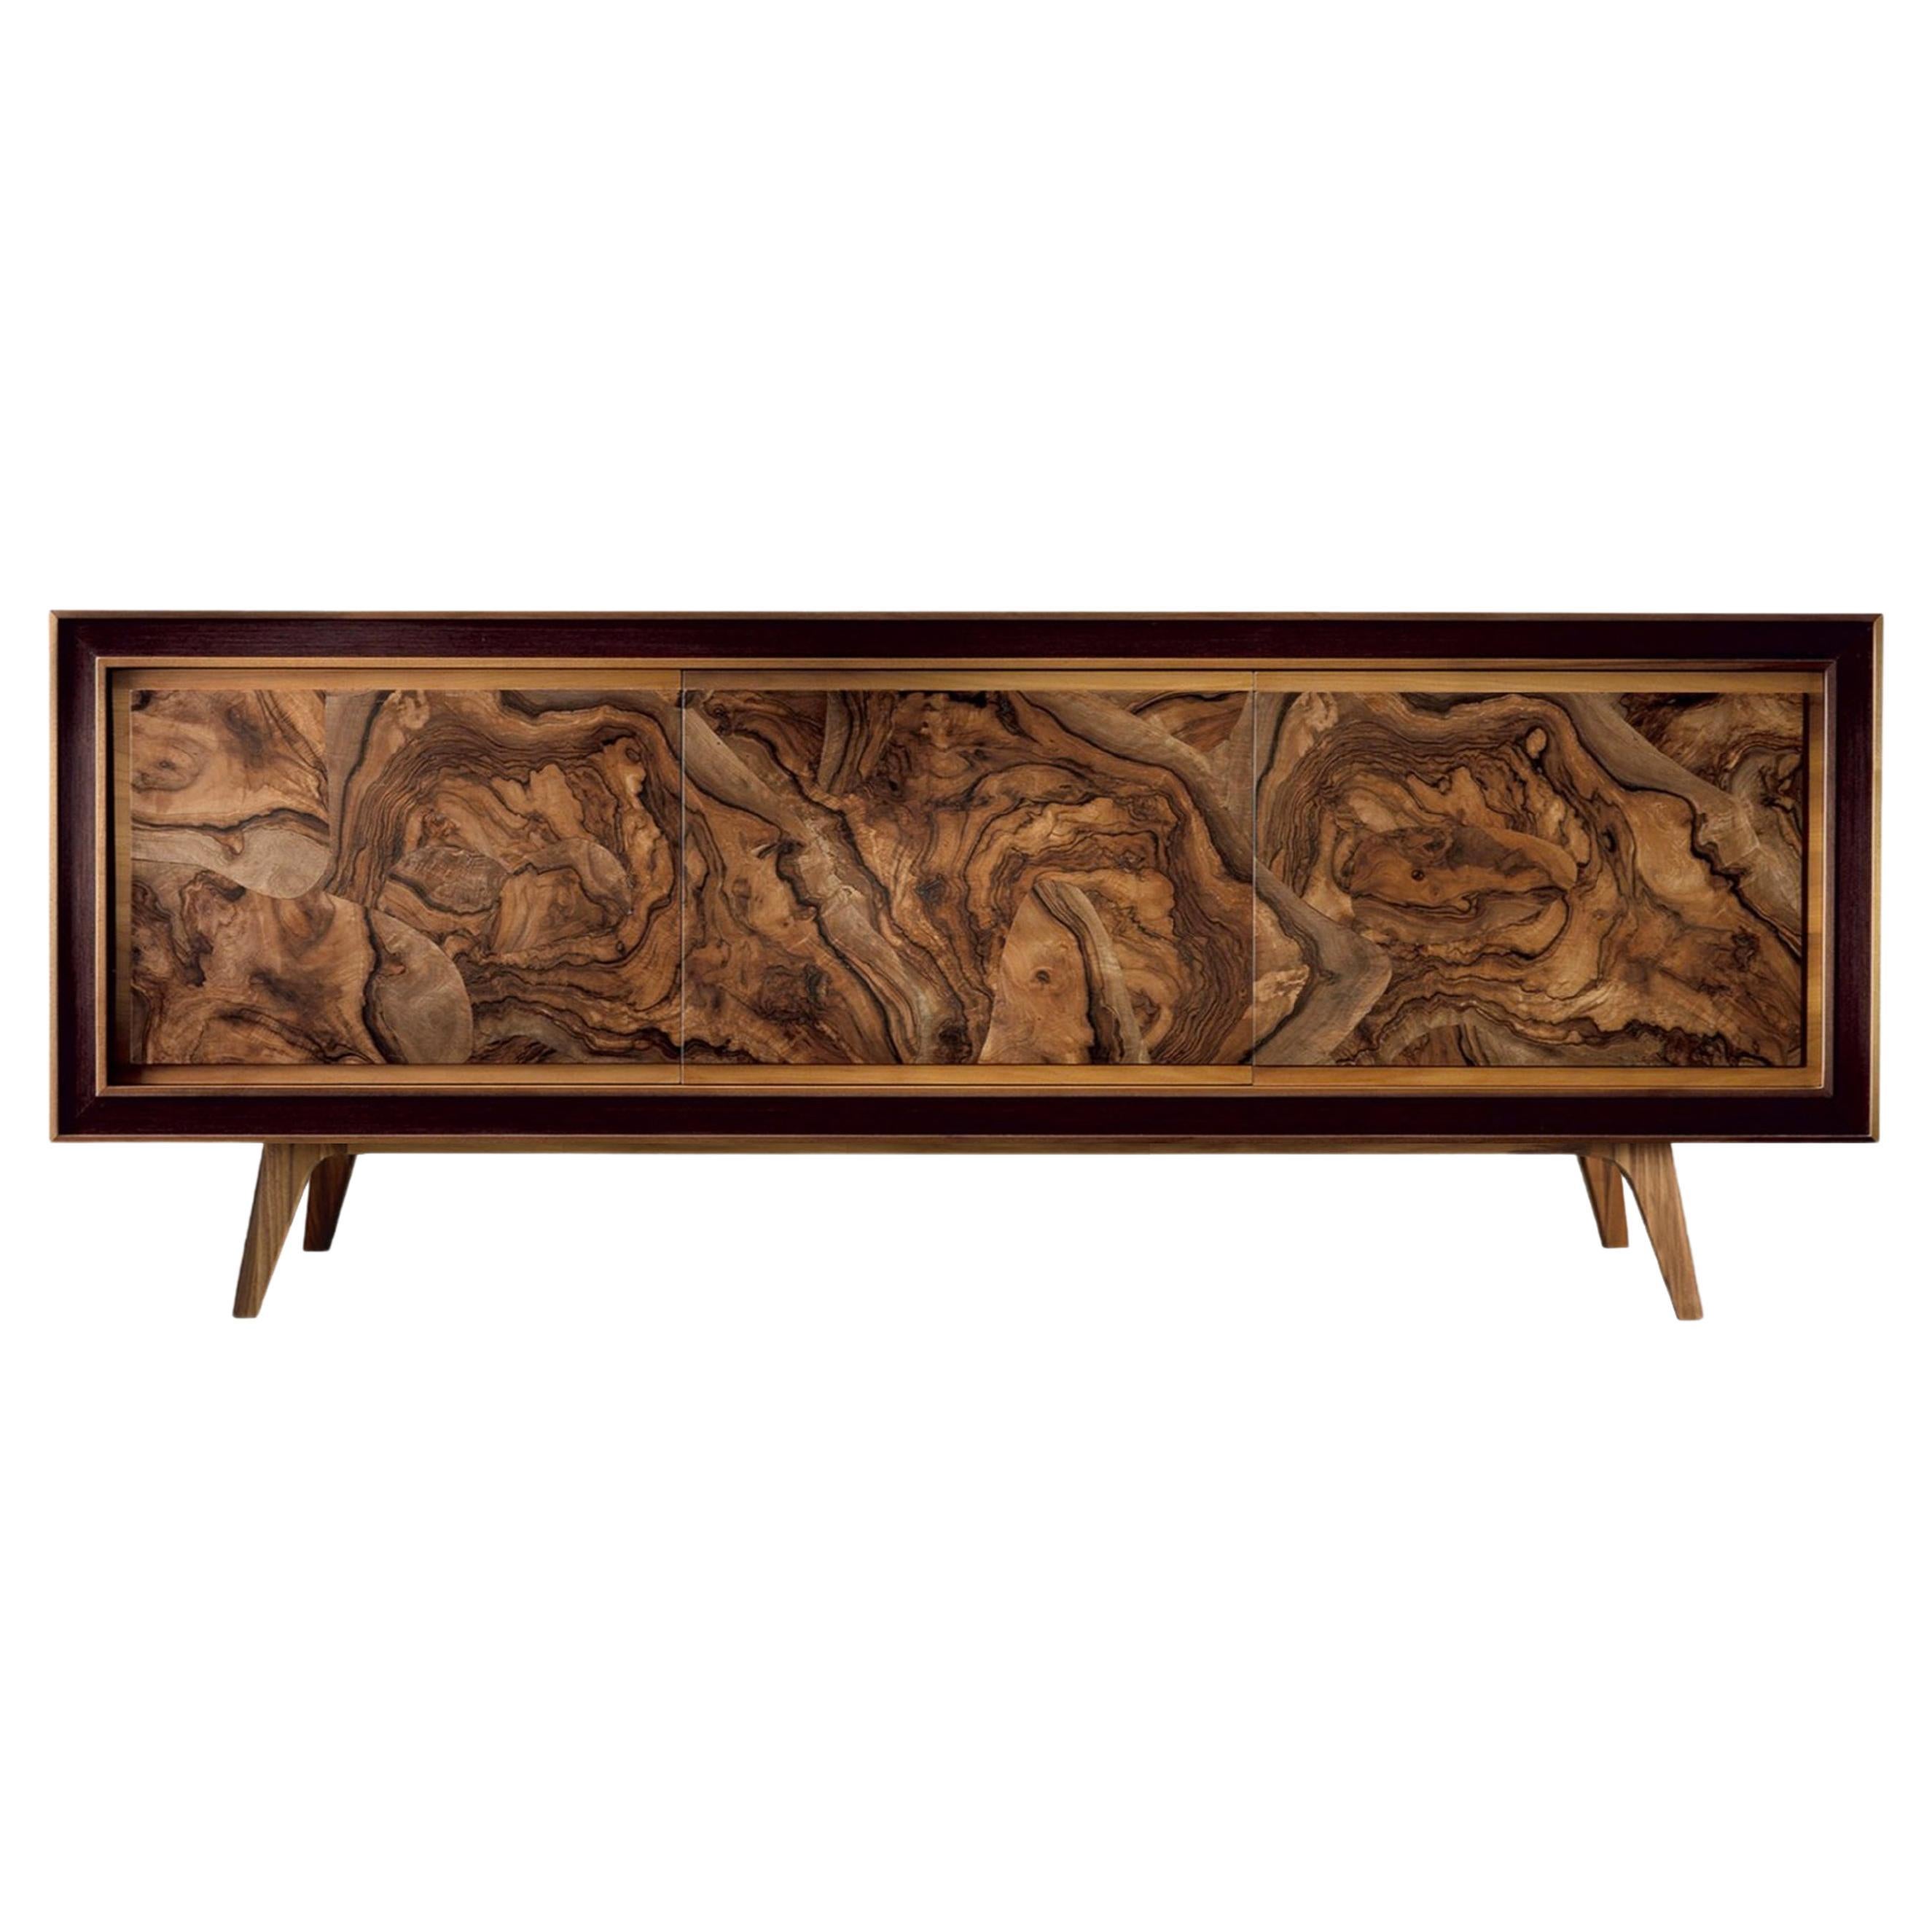 An elegant, stunning sideboard finely crafted in Italy with passion by expert hands. It's composed of three doors in premium solid walnut with fine root veneer, each piece is unique, presenting different wood veins. The oil finish brings out the